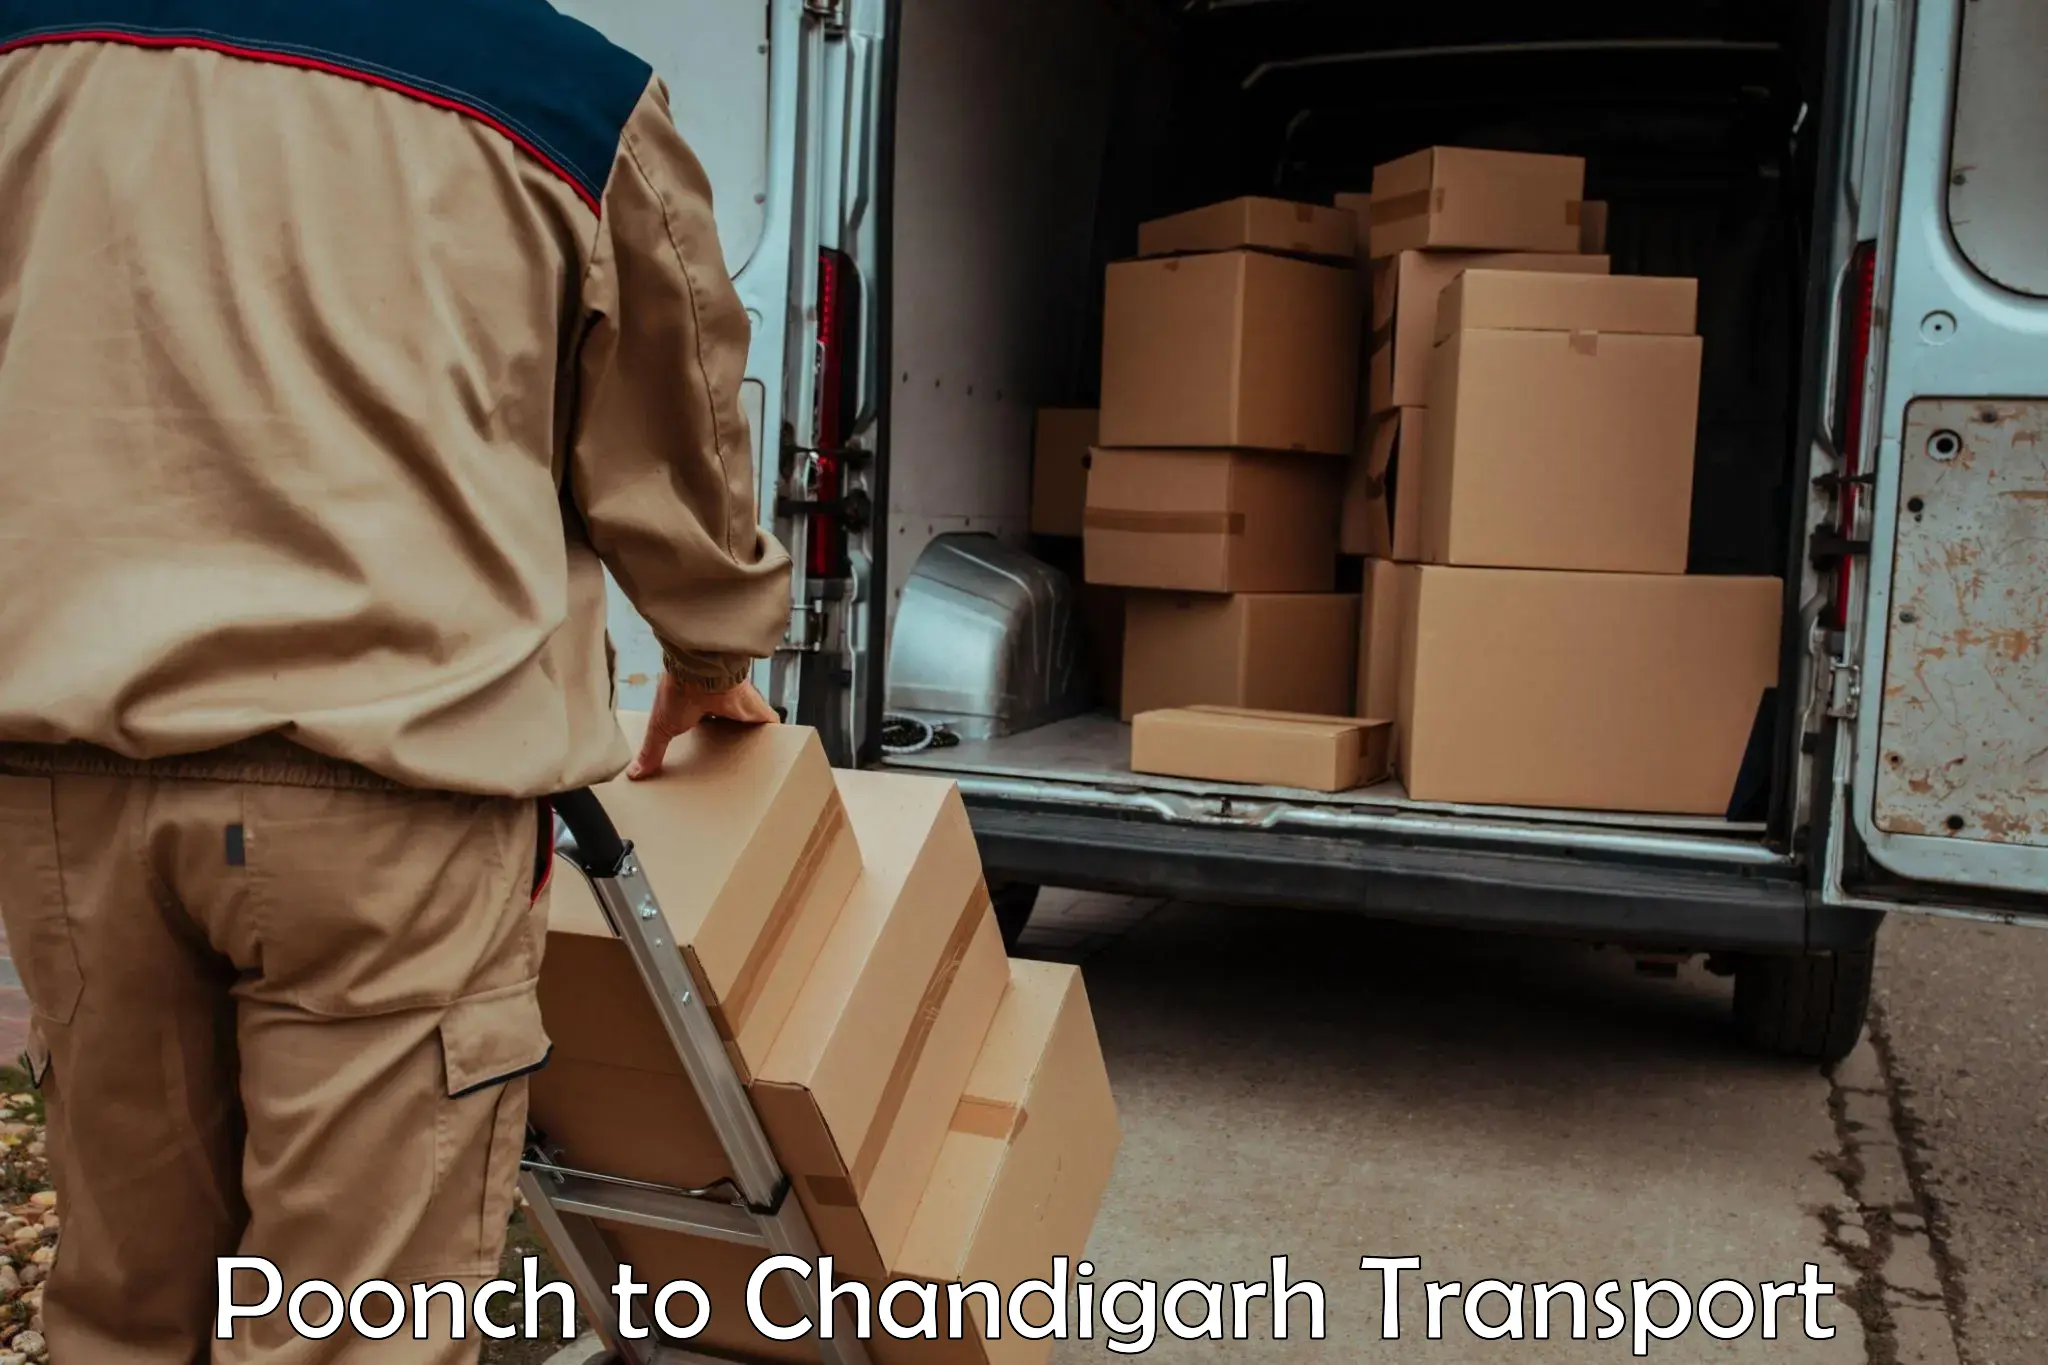 Shipping partner Poonch to Chandigarh